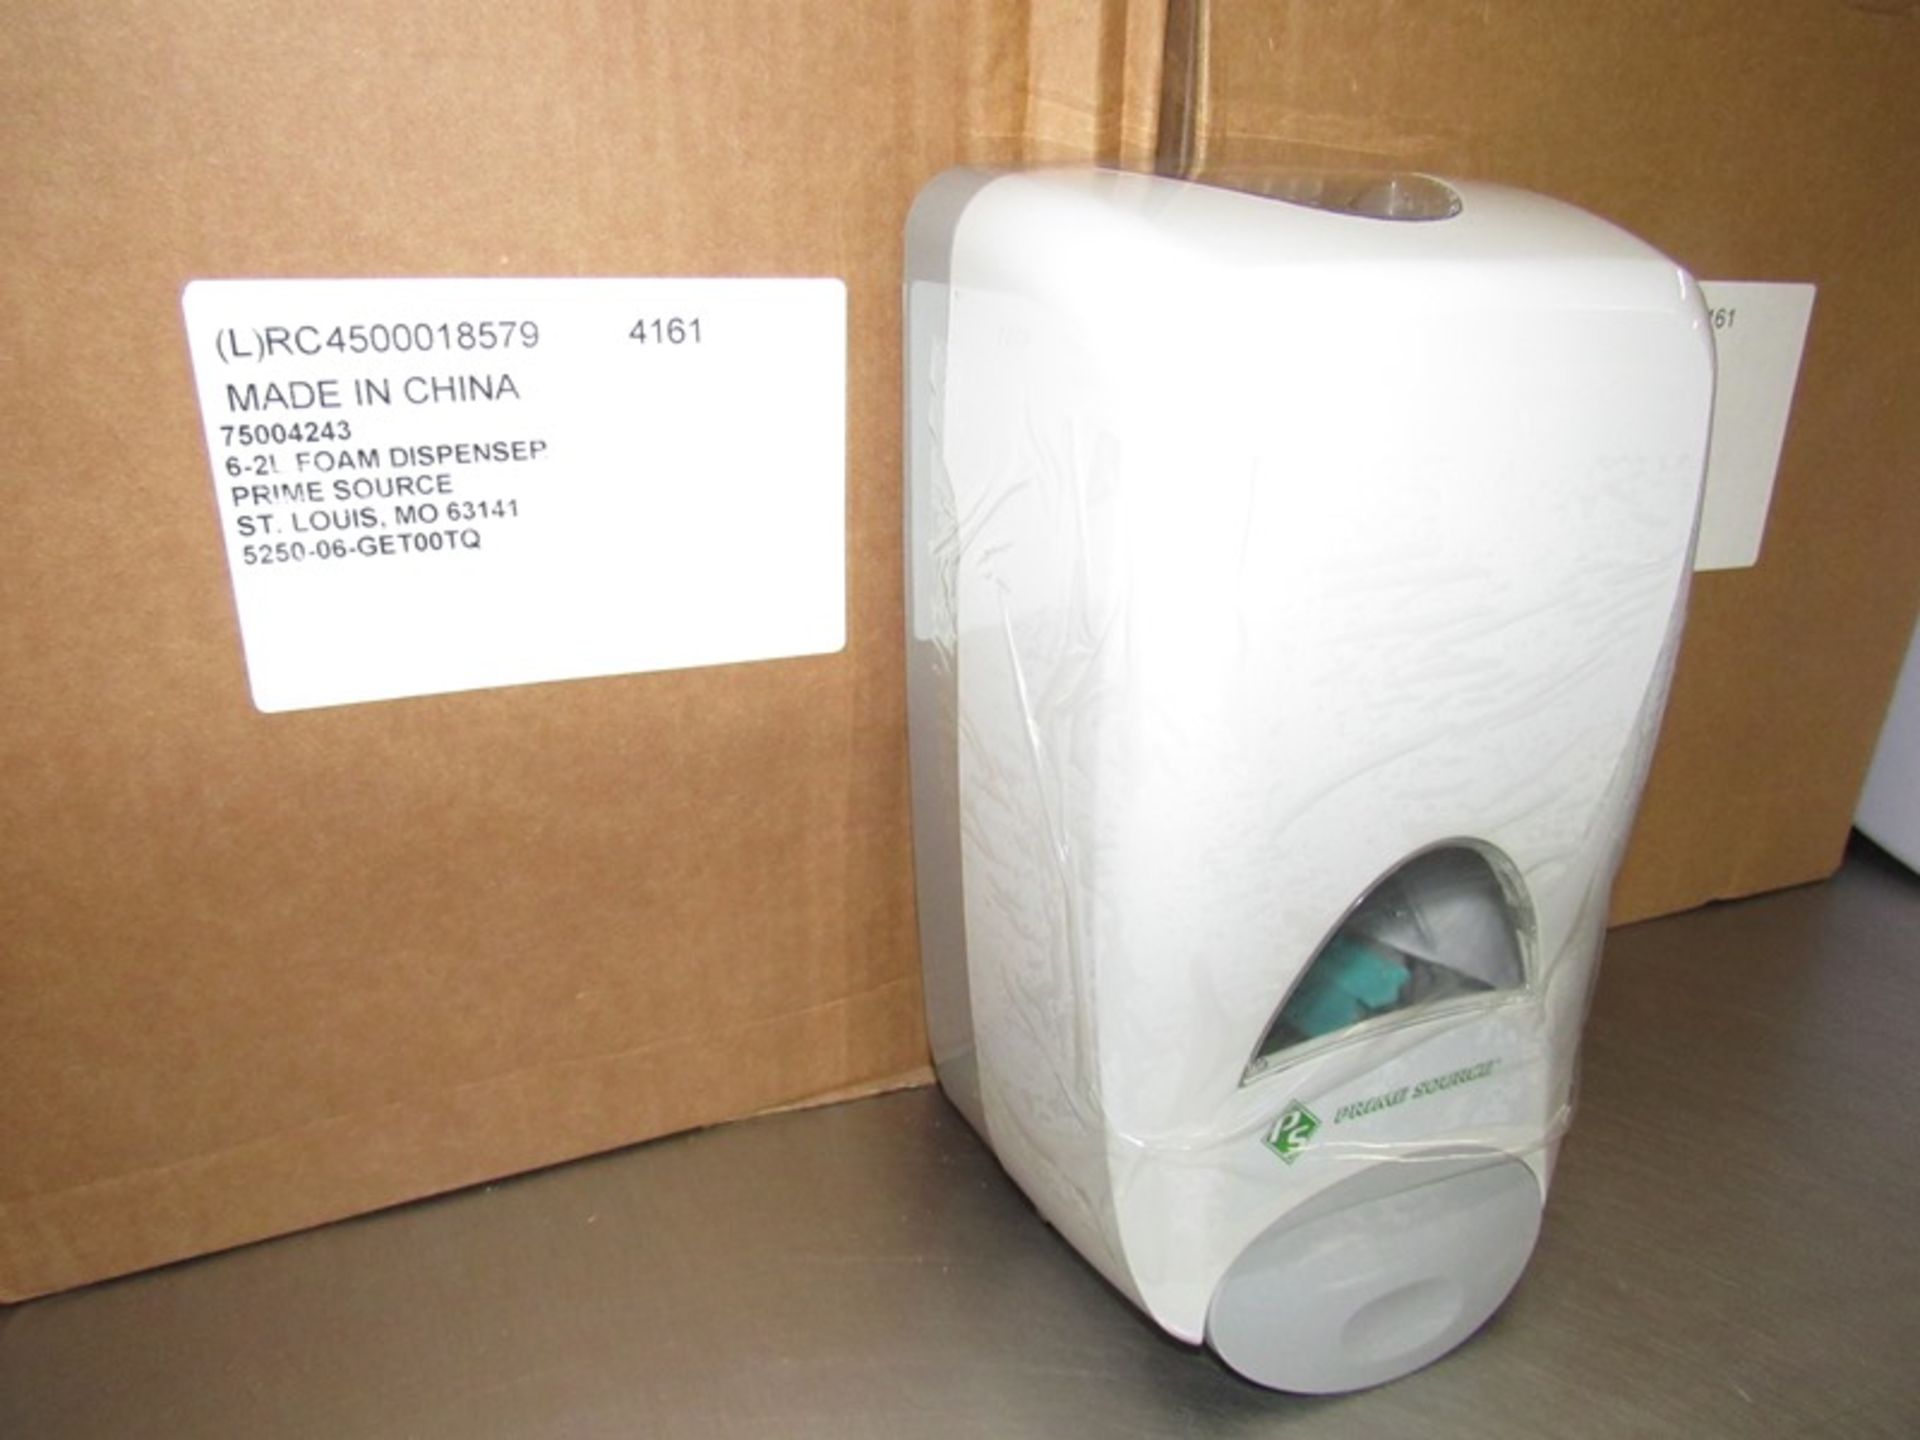 Lot of: (1) Kimberly Clark Mdl. 3434800 Touchless Hand Roll Towel Dispenser (battery operated), ( - Image 6 of 10